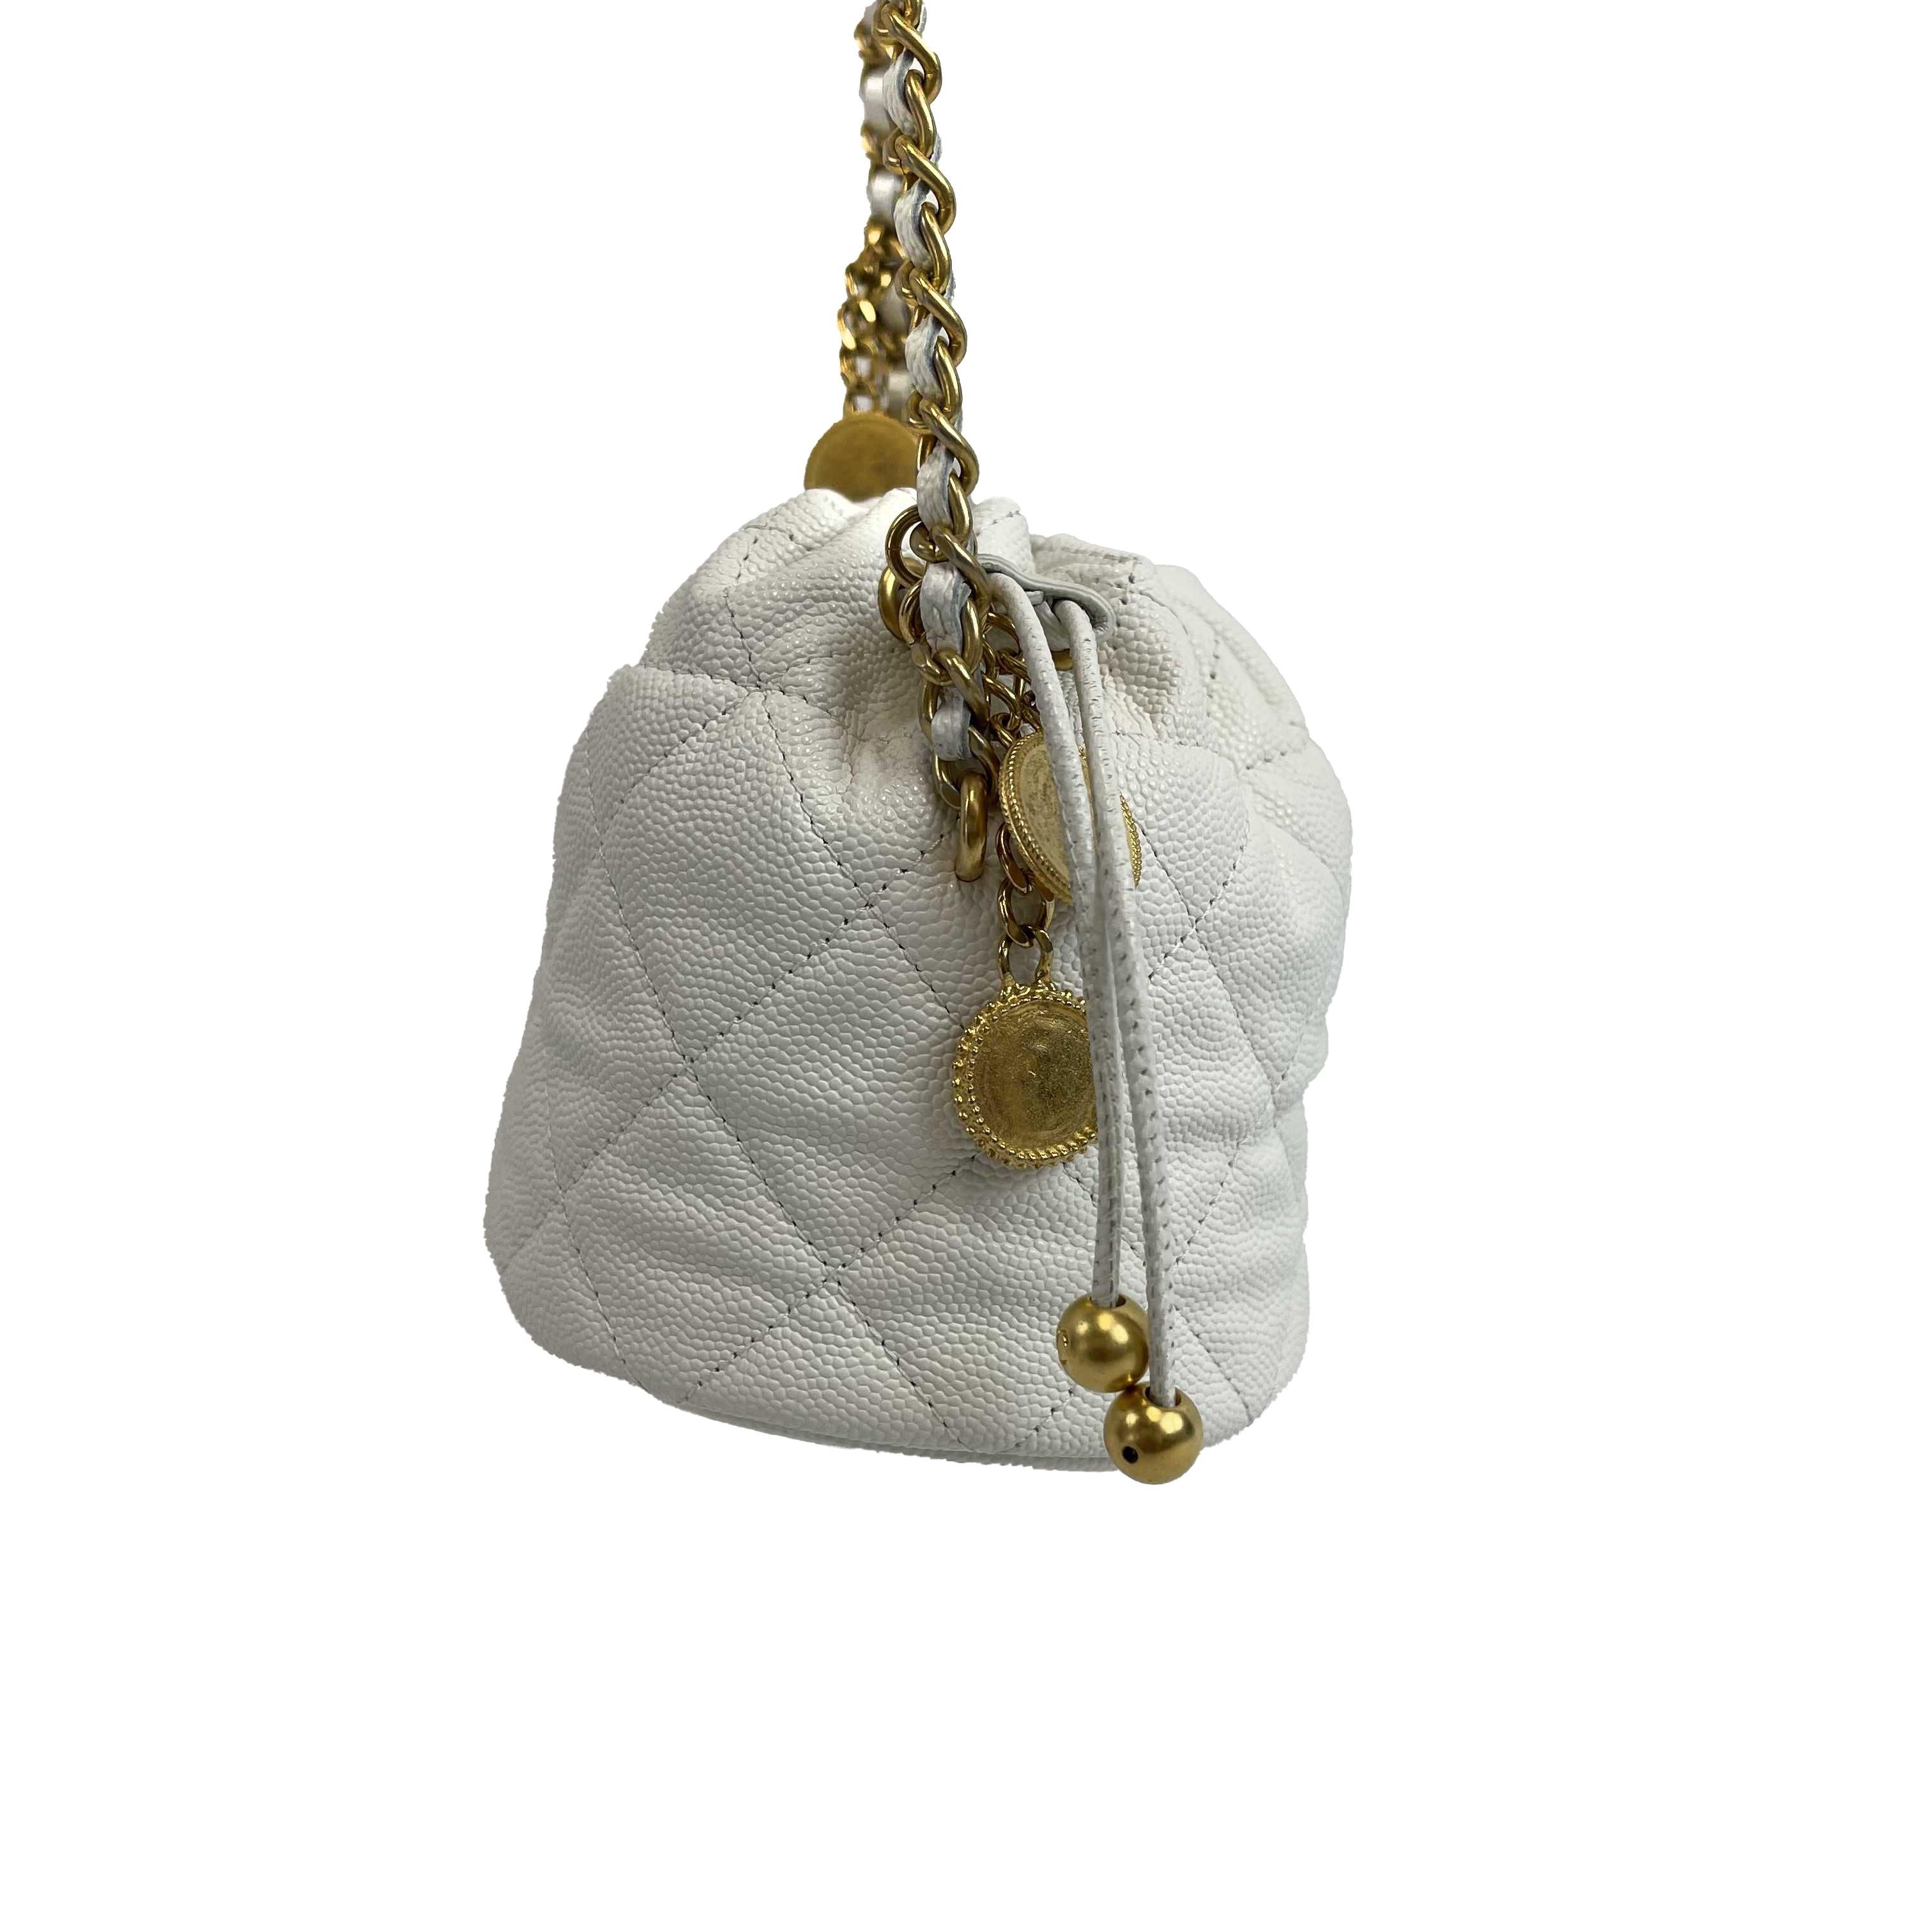 CHANEL - NEW Mini Bucket Bag - White Caviar Leather / Gold 10 Coins CC Crossbody For Sale 10